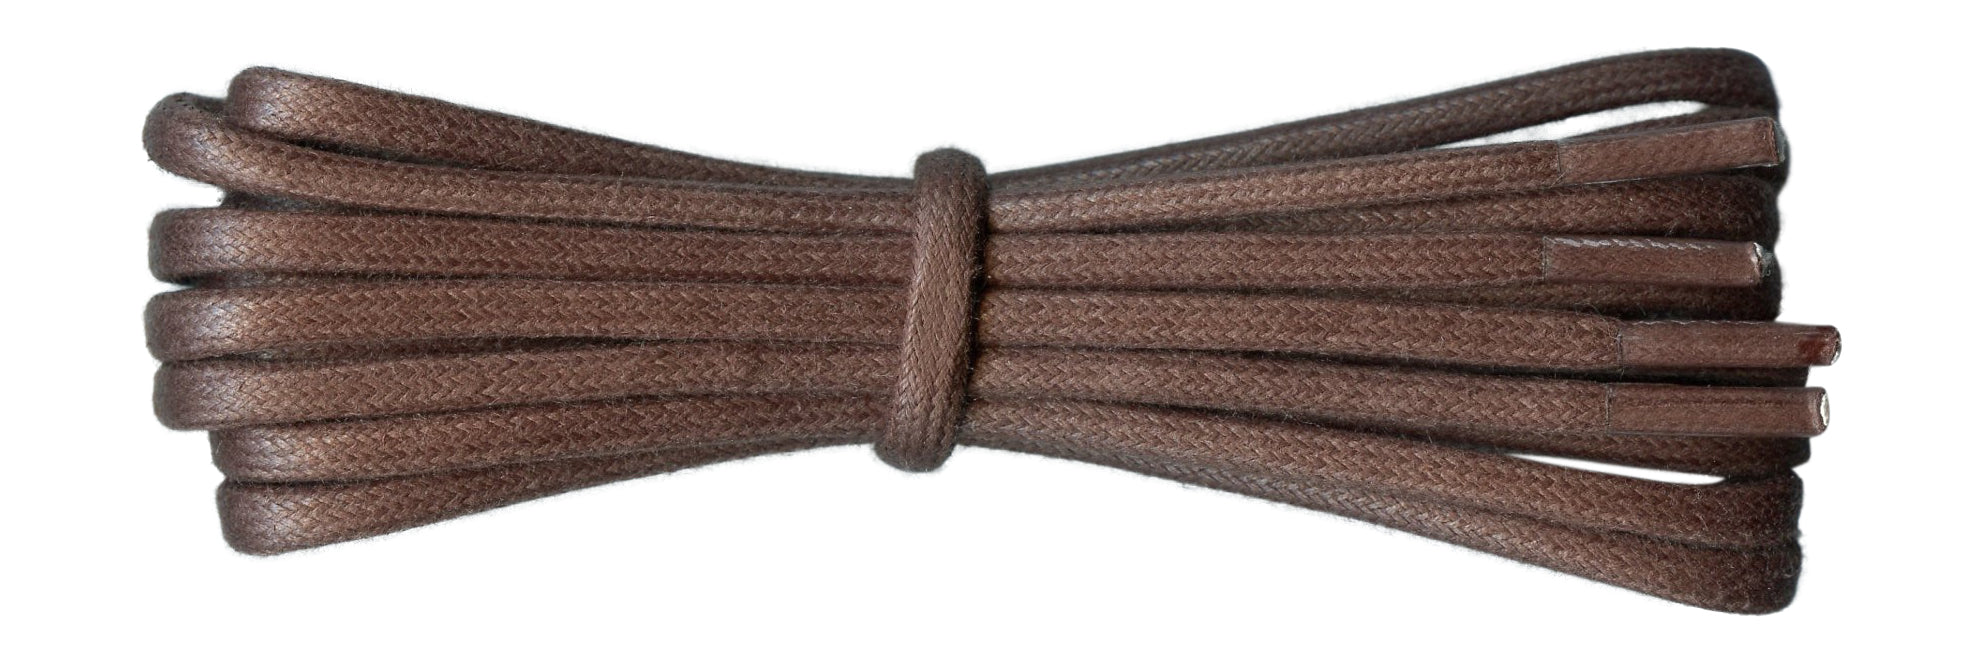 flat waxed cotton boot laces